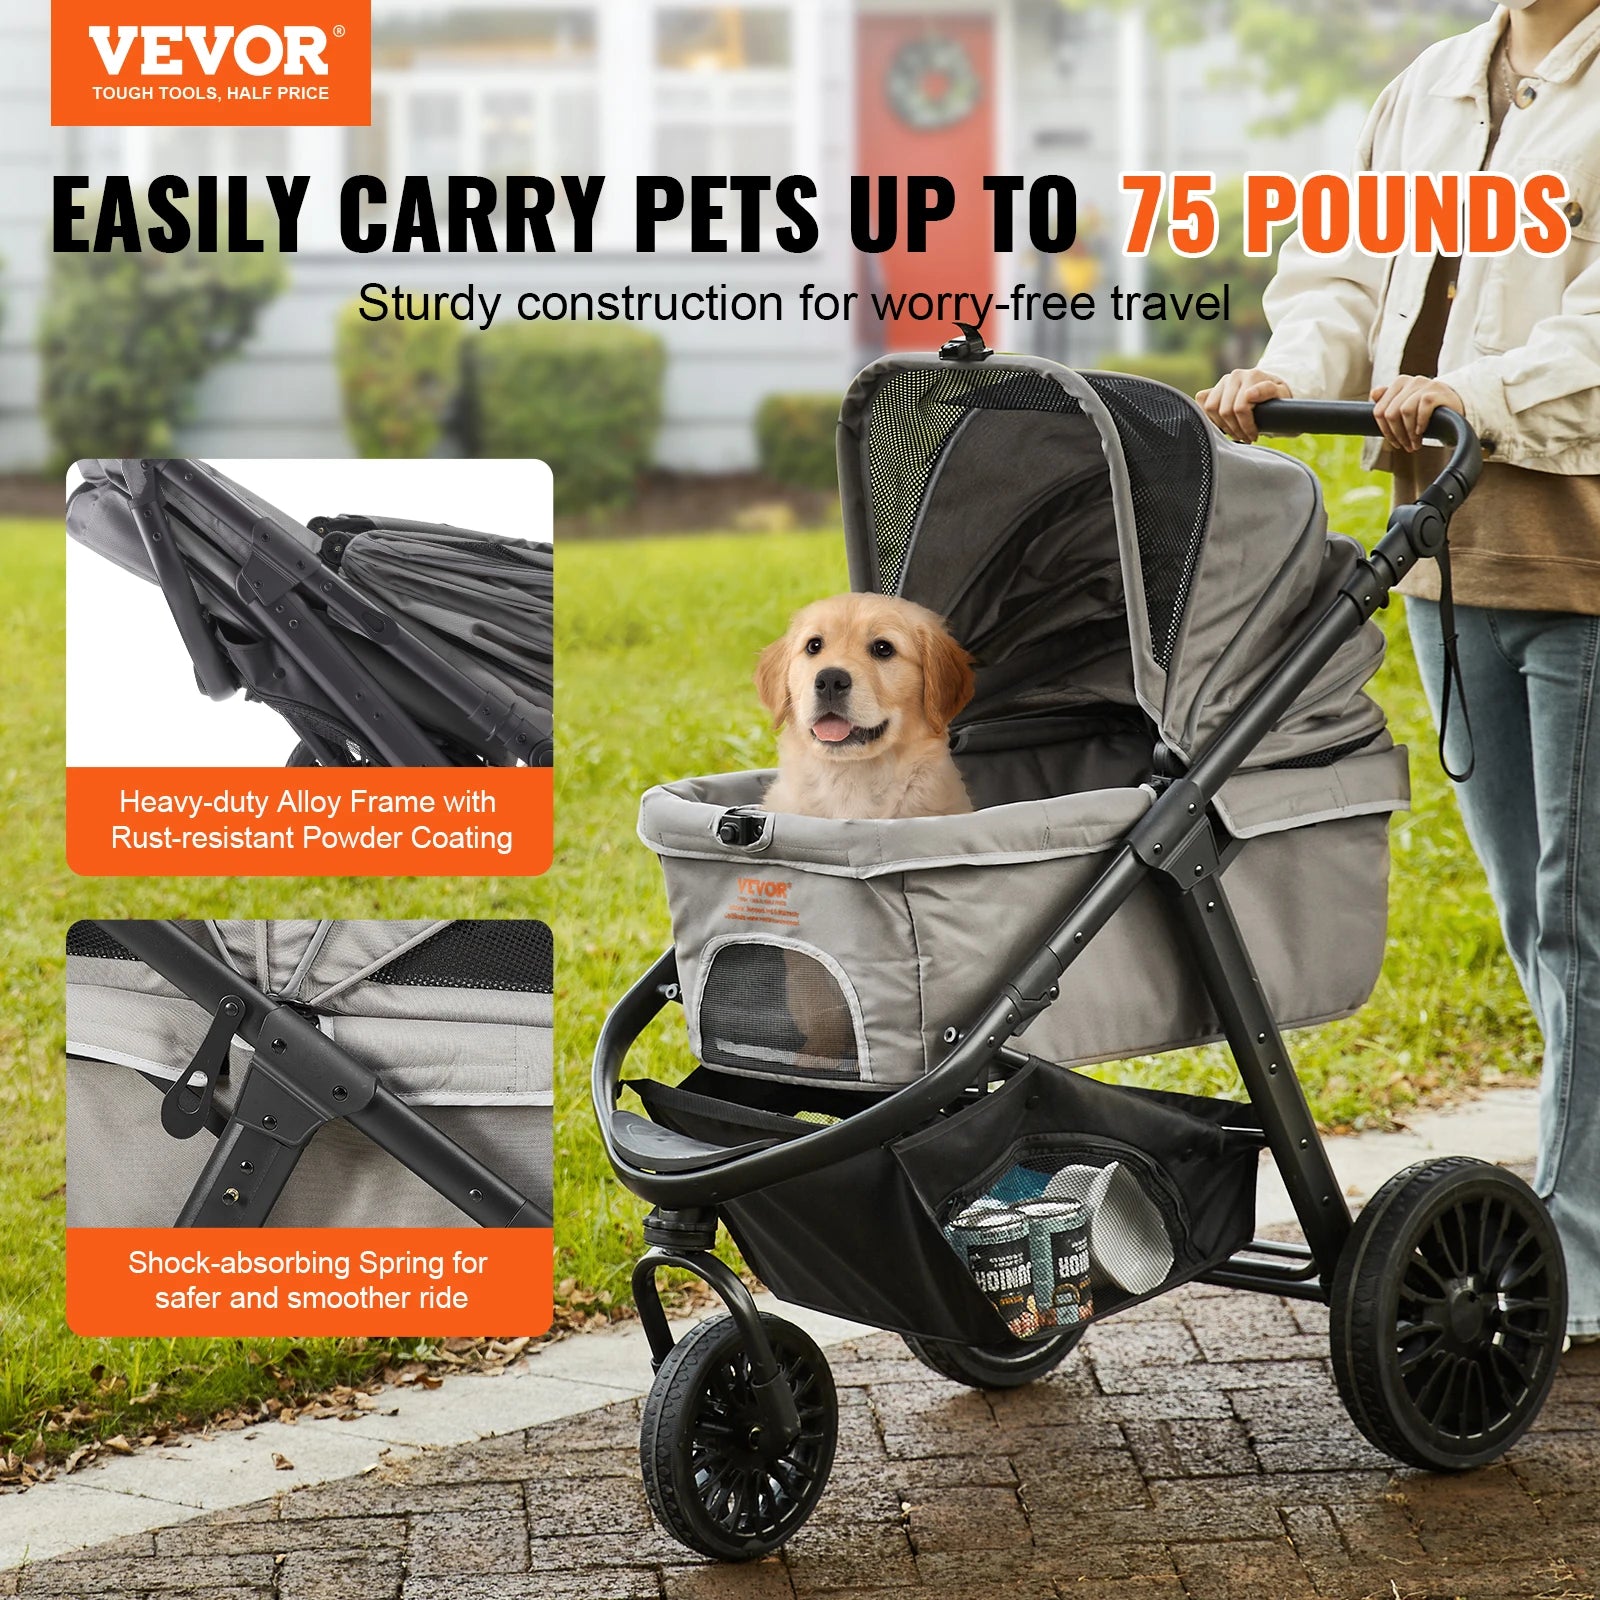 VEVOR Pet Stroller Carrier Dog Cat Strollers Lightweight Travel Rotate with Brakes Pet Pad Cup Holder for Puppy Dog Accessories